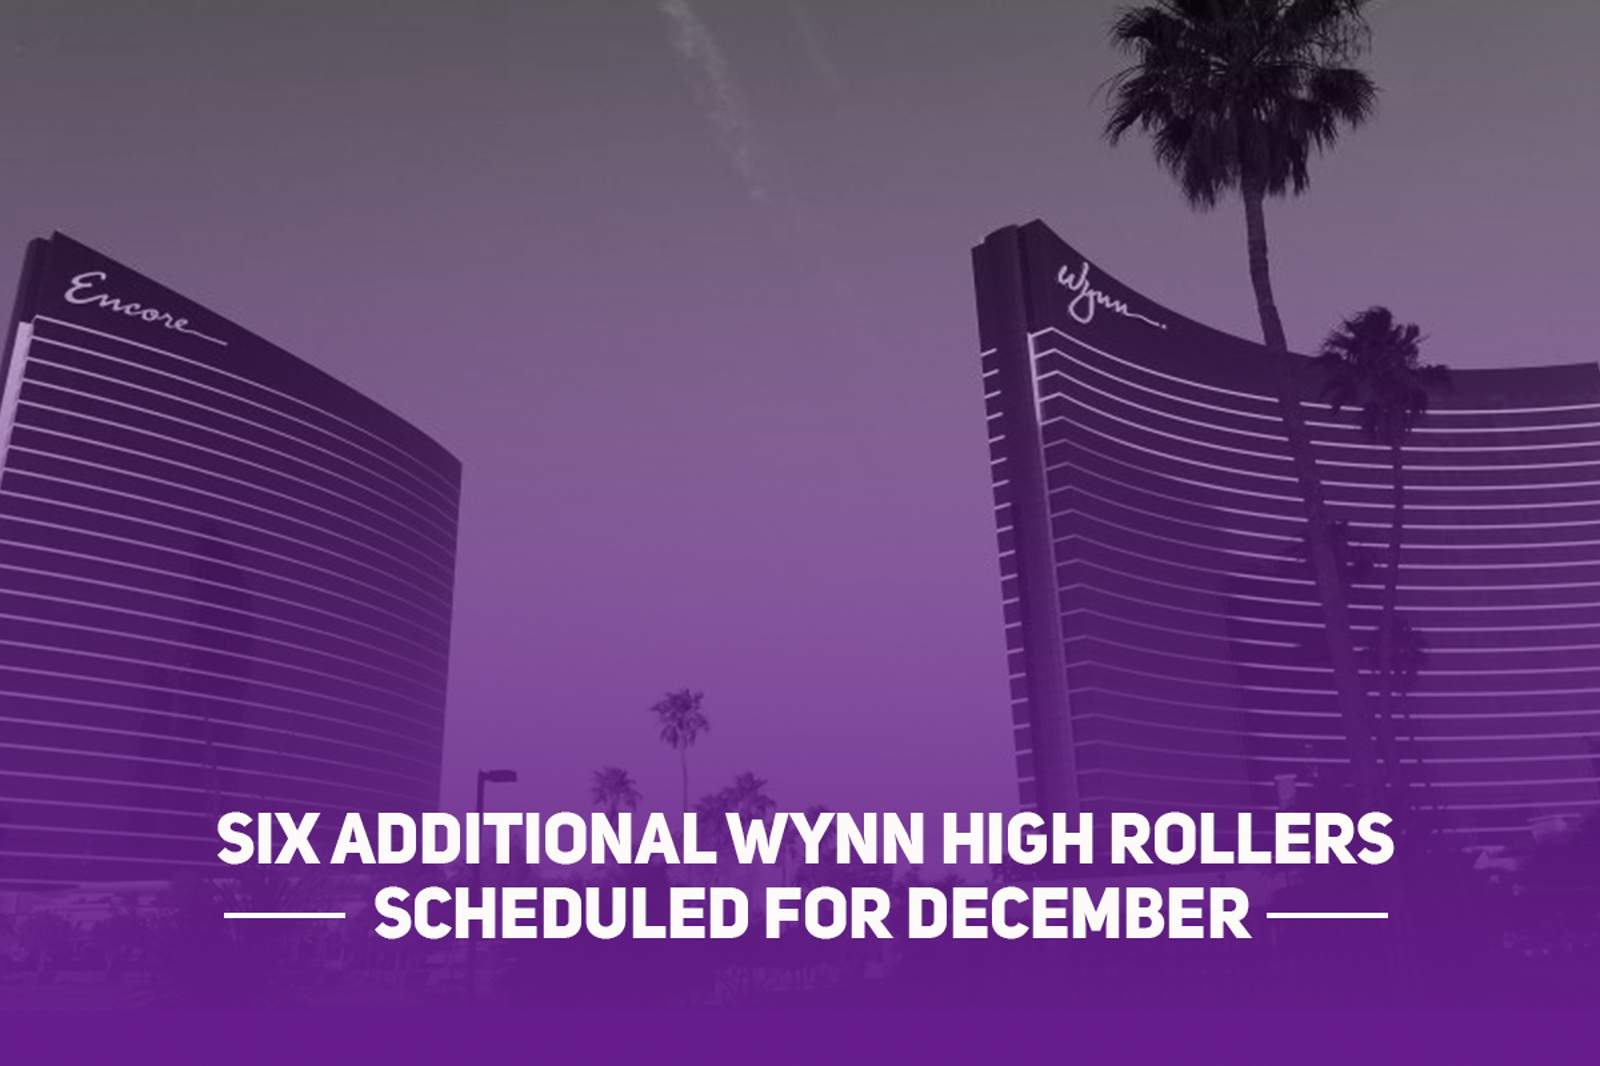 Wynn High Rollers: Six Additional $10,000 Events Scheduled for December